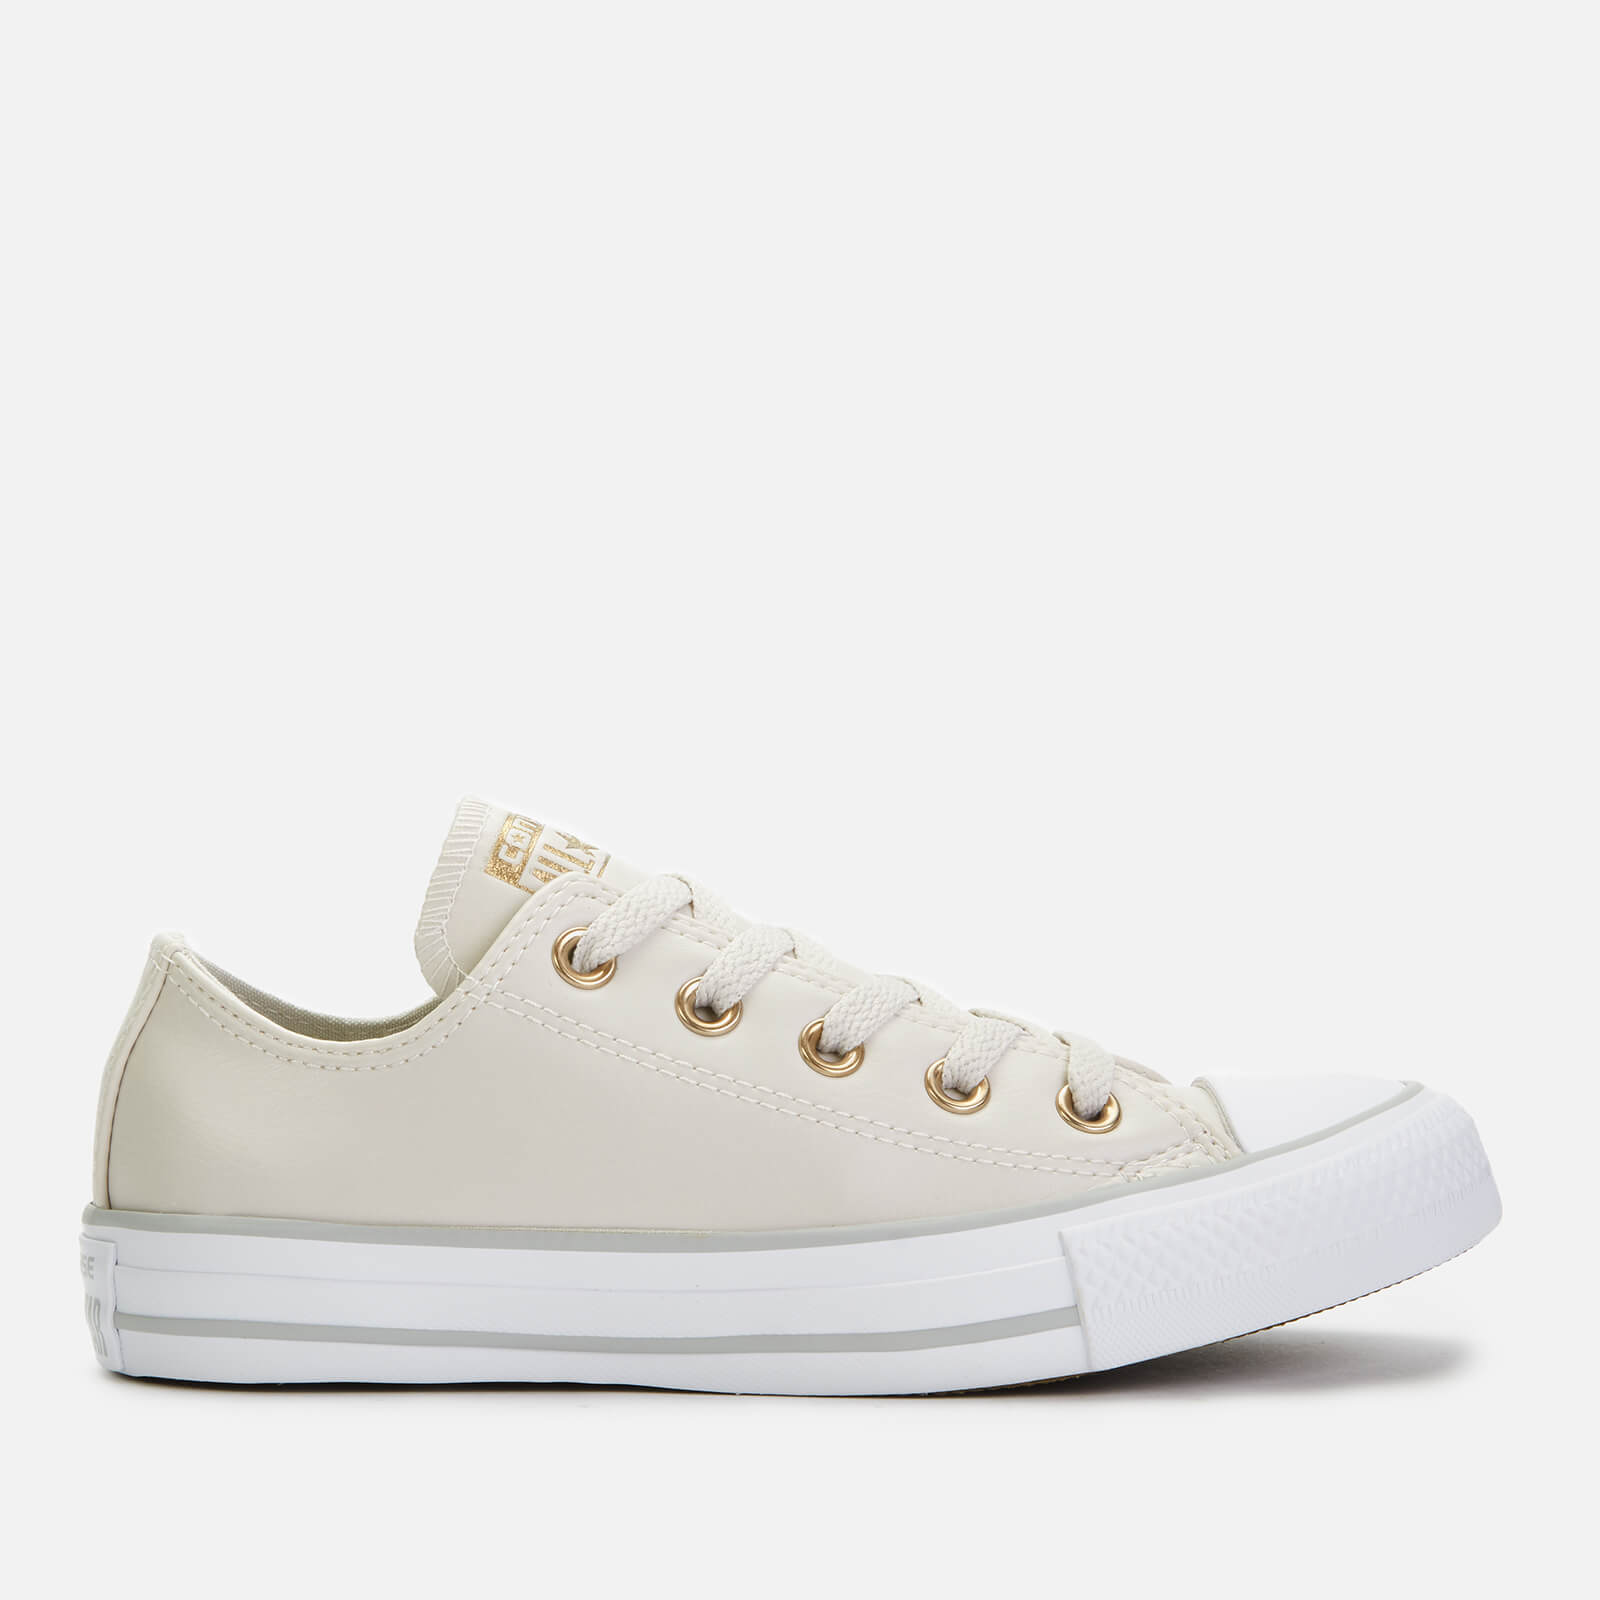 converse chuck taylor all star ox in pale grey